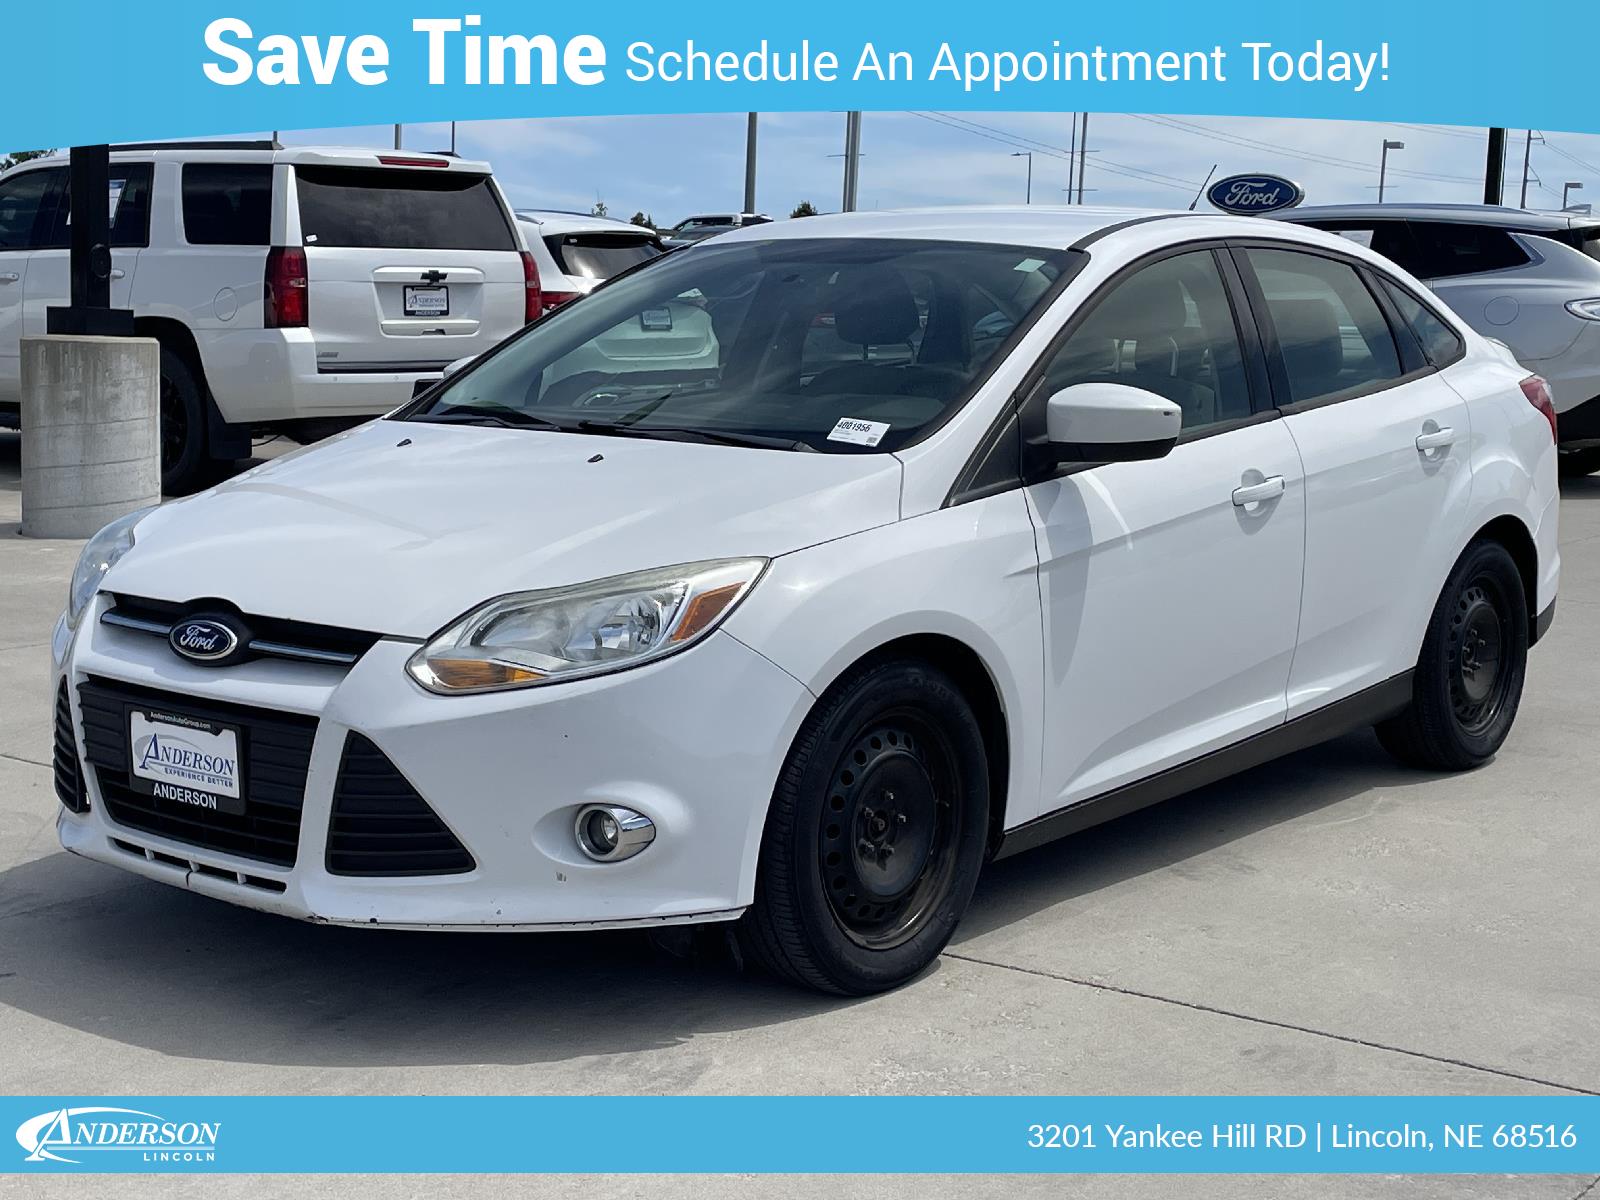 Used 2012 Ford Focus SE Stock: 4001956A